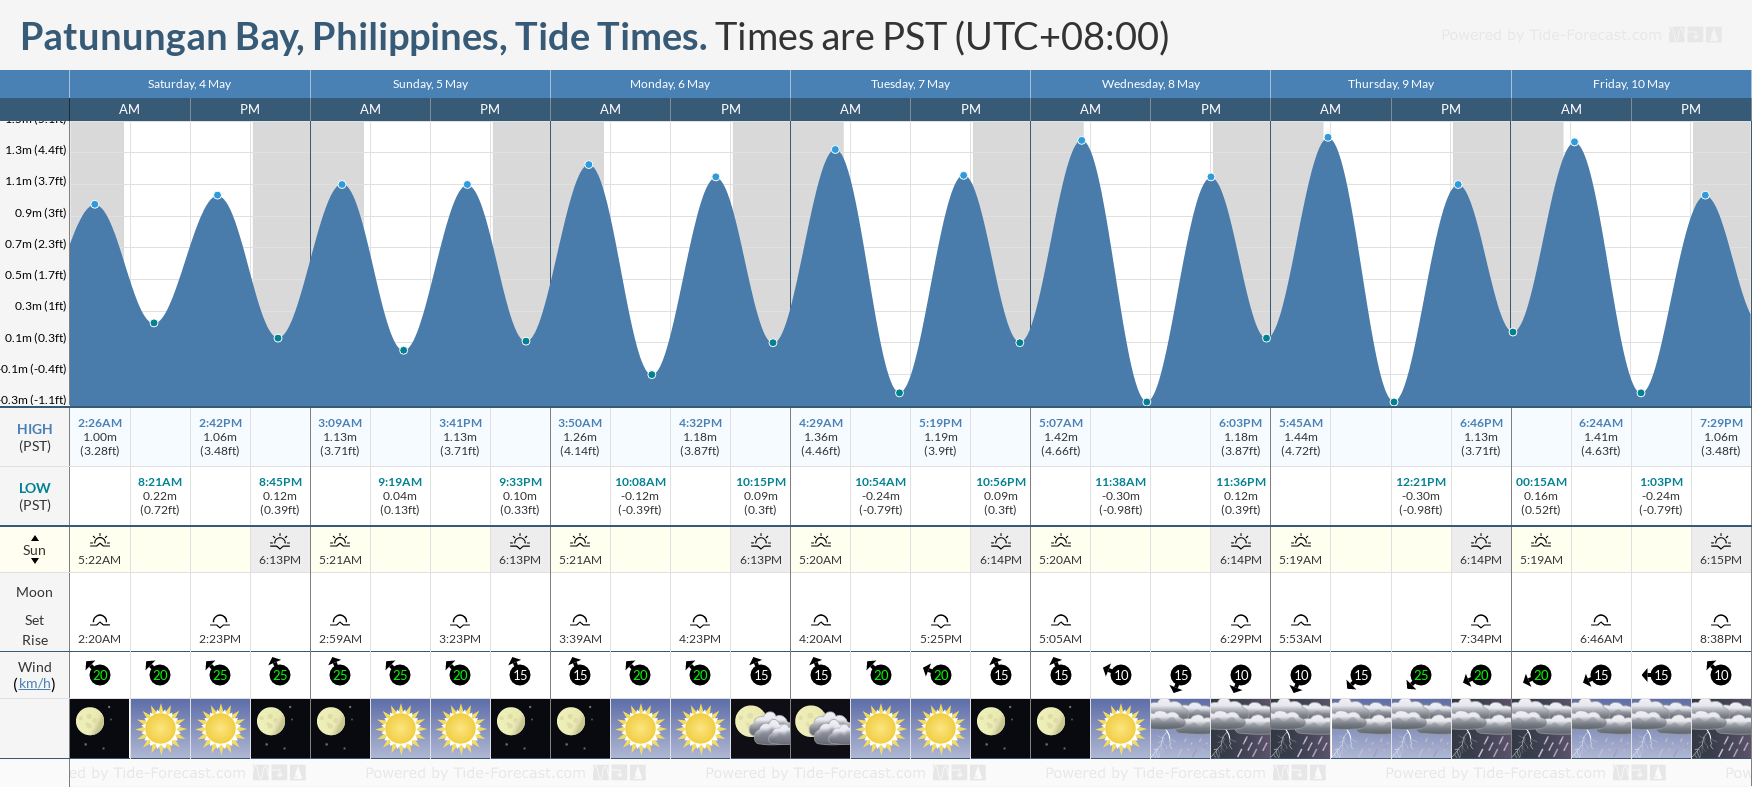 Patunungan Bay, Philippines Tide Chart including high and low tide times for the next 7 days